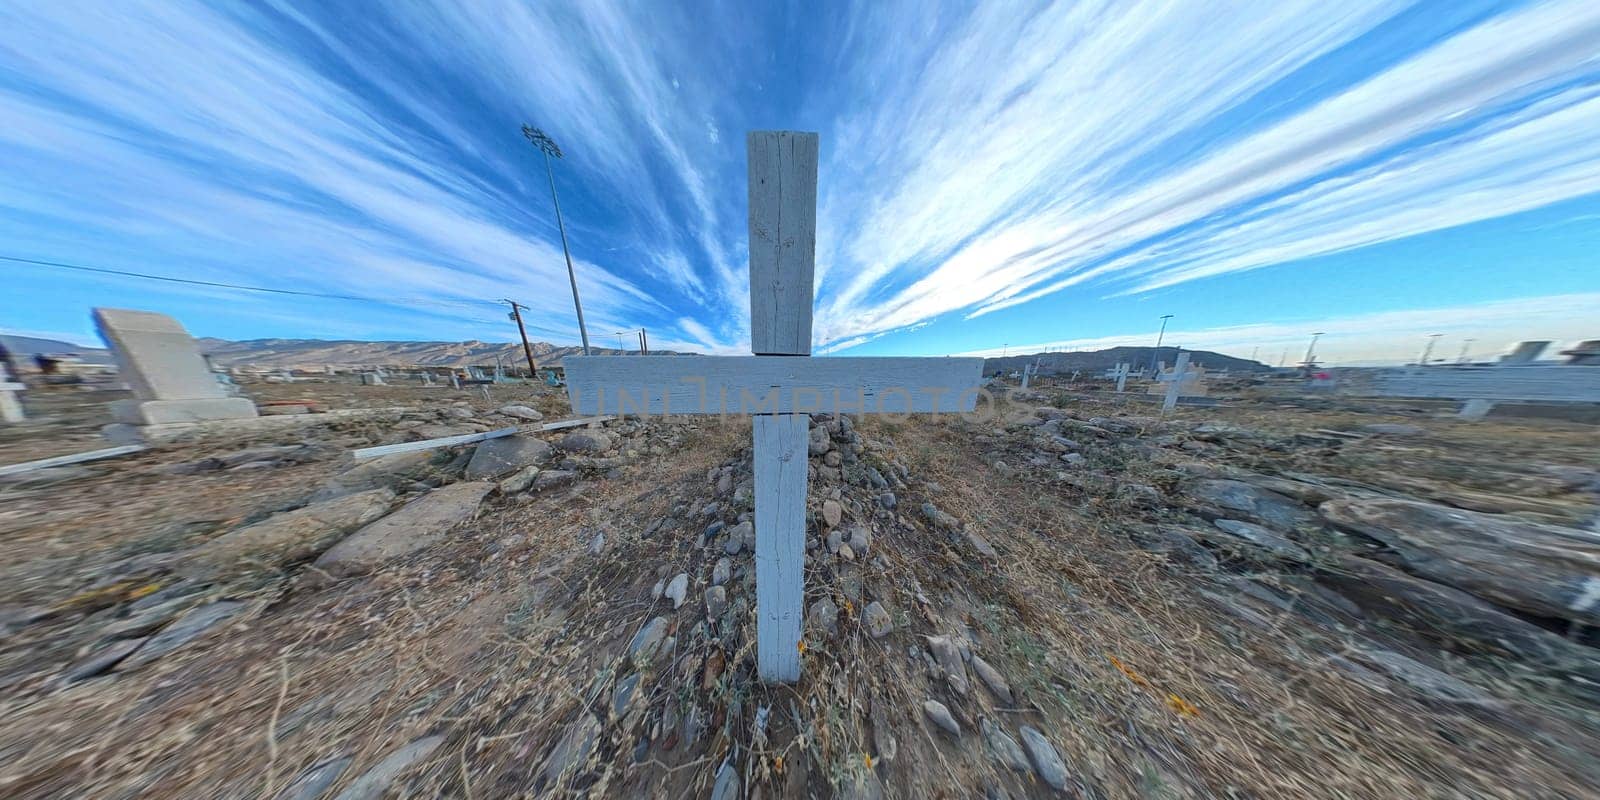 Wooden cross at cemetery with stripped sky background by Marcielito